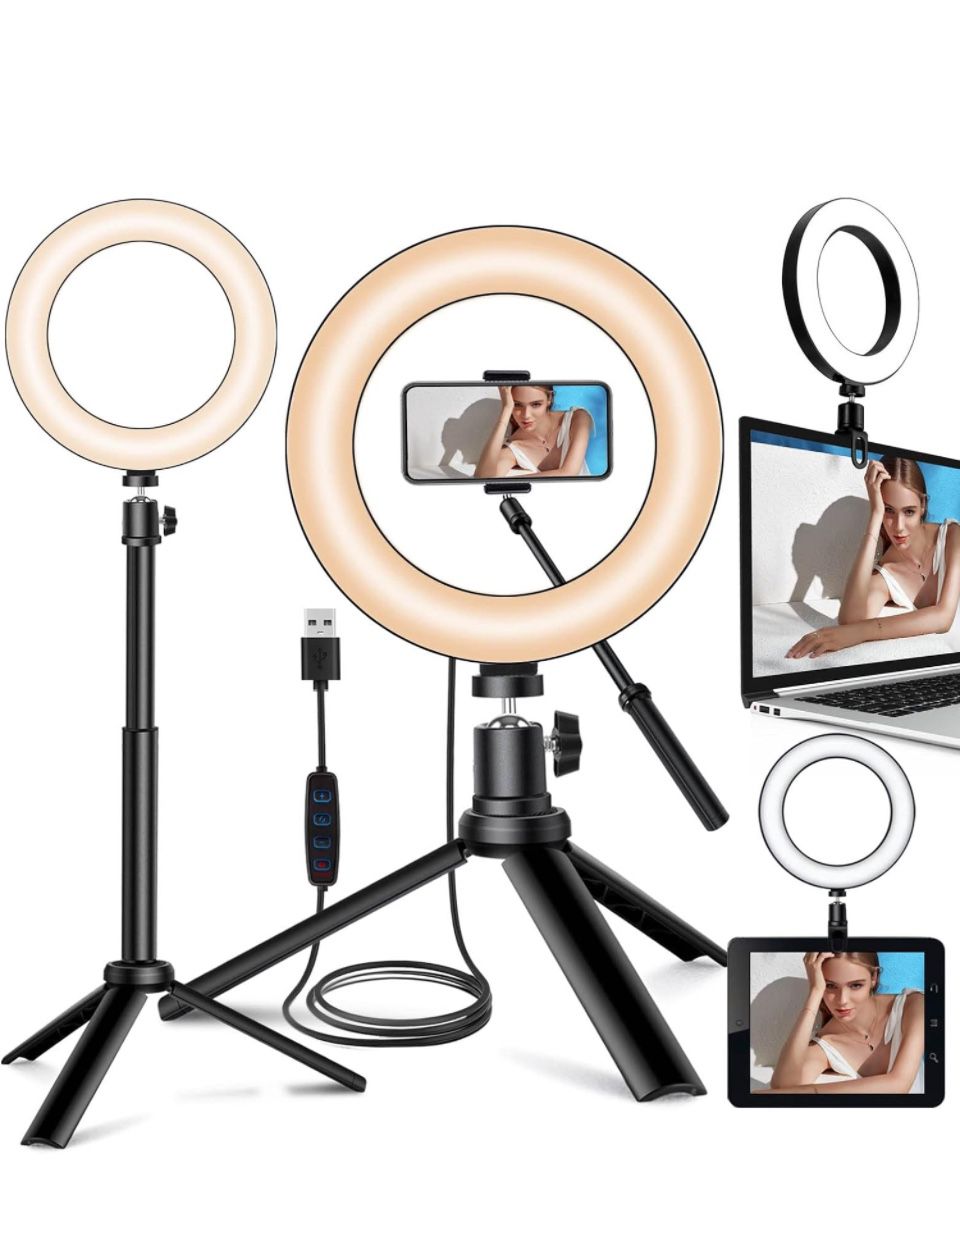 Selfie Ring Light for Zoom Meeting, Dimmable Desktop LED Circle Light with Tripod Stand, 6'' Lighting Kit Gifts for Live Streaming/Laptop Video Confer